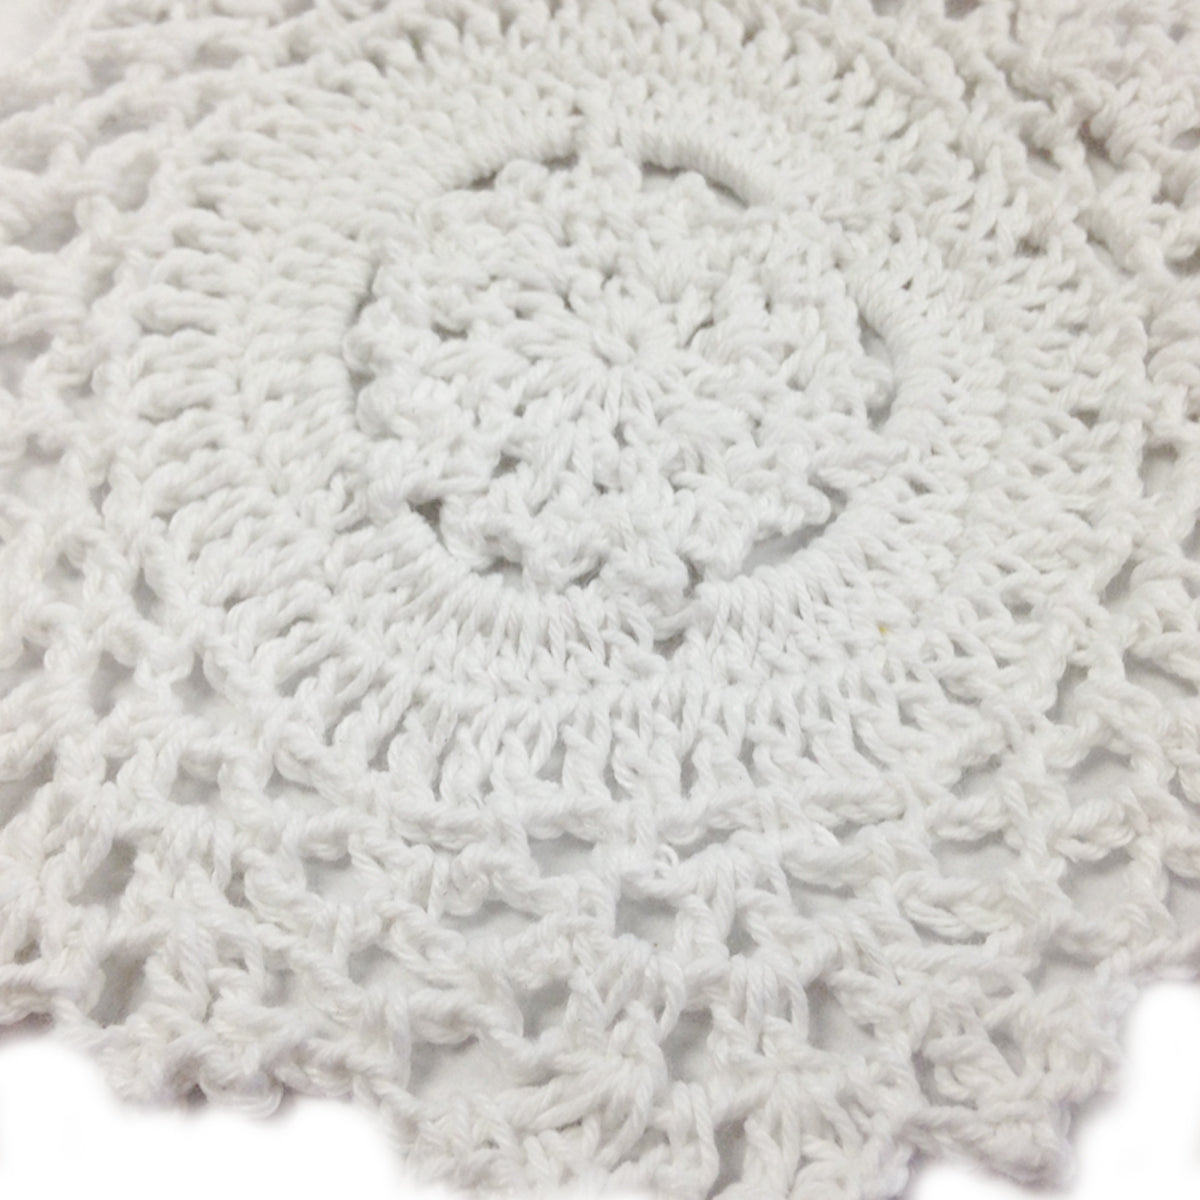 Wrapables Small White Round Crochet Cotton Doily Placemat, Set of 4